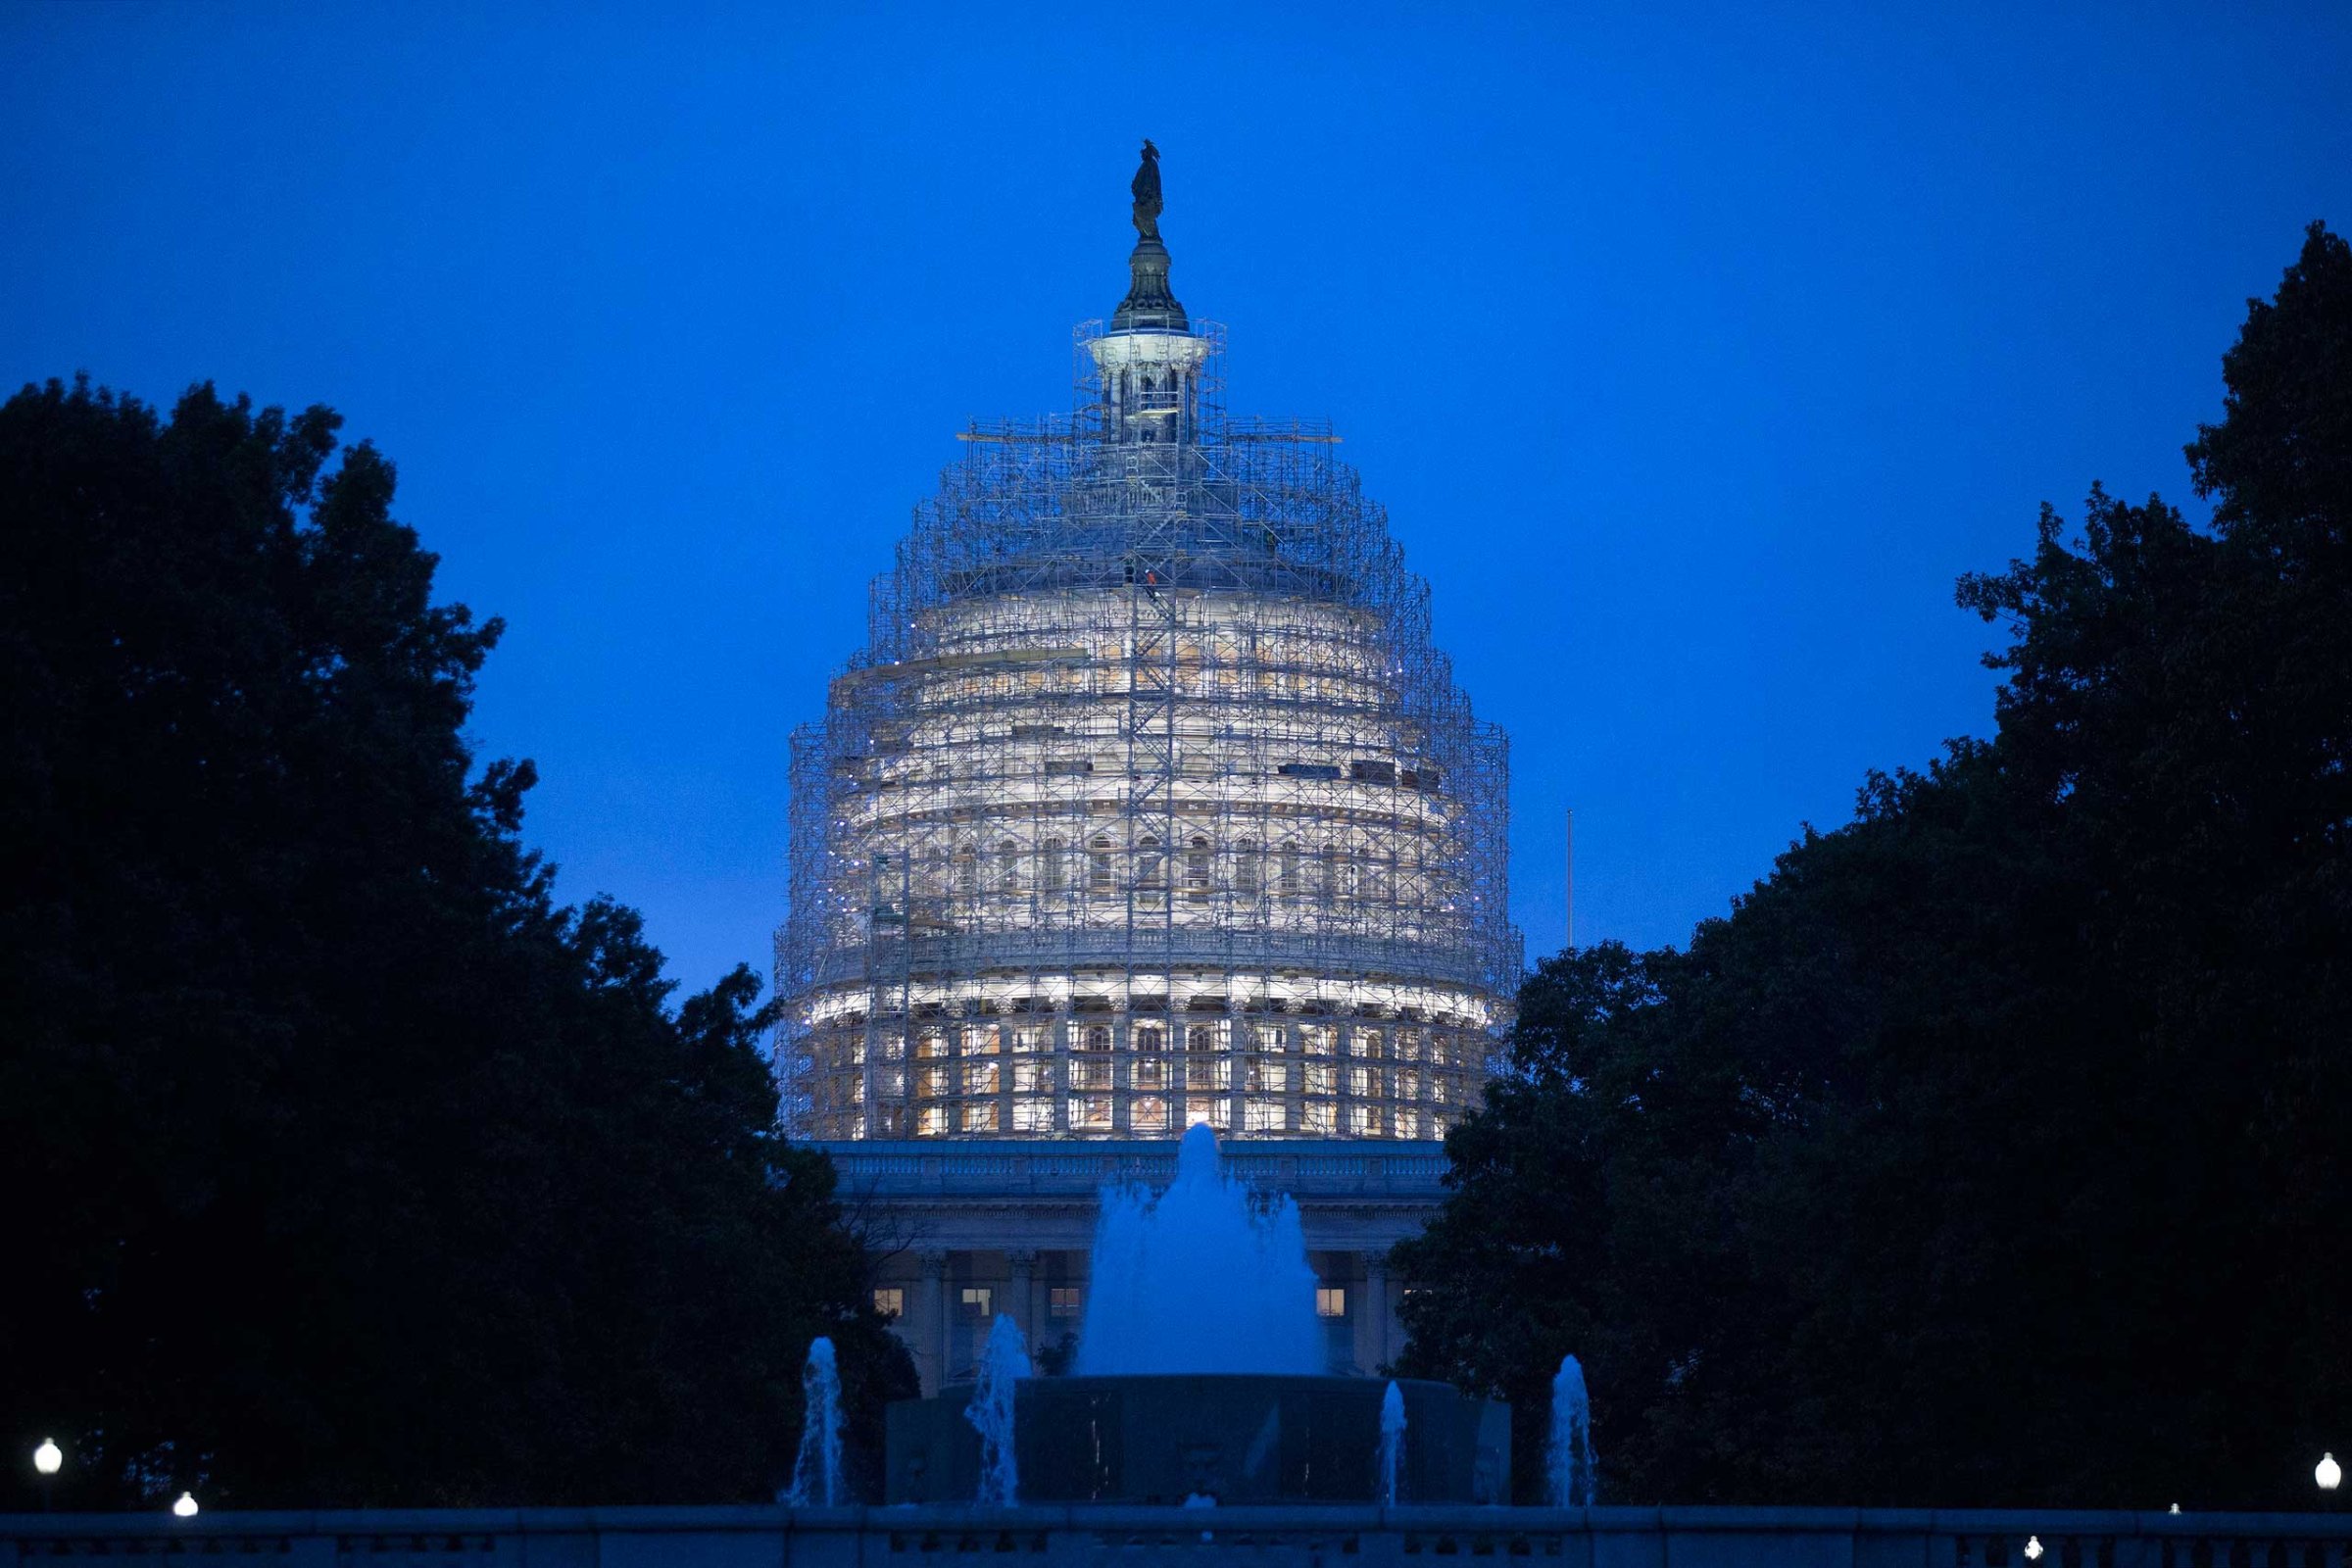 Views Of The U.S. Capitol As Republicans Take Control Of The Senate